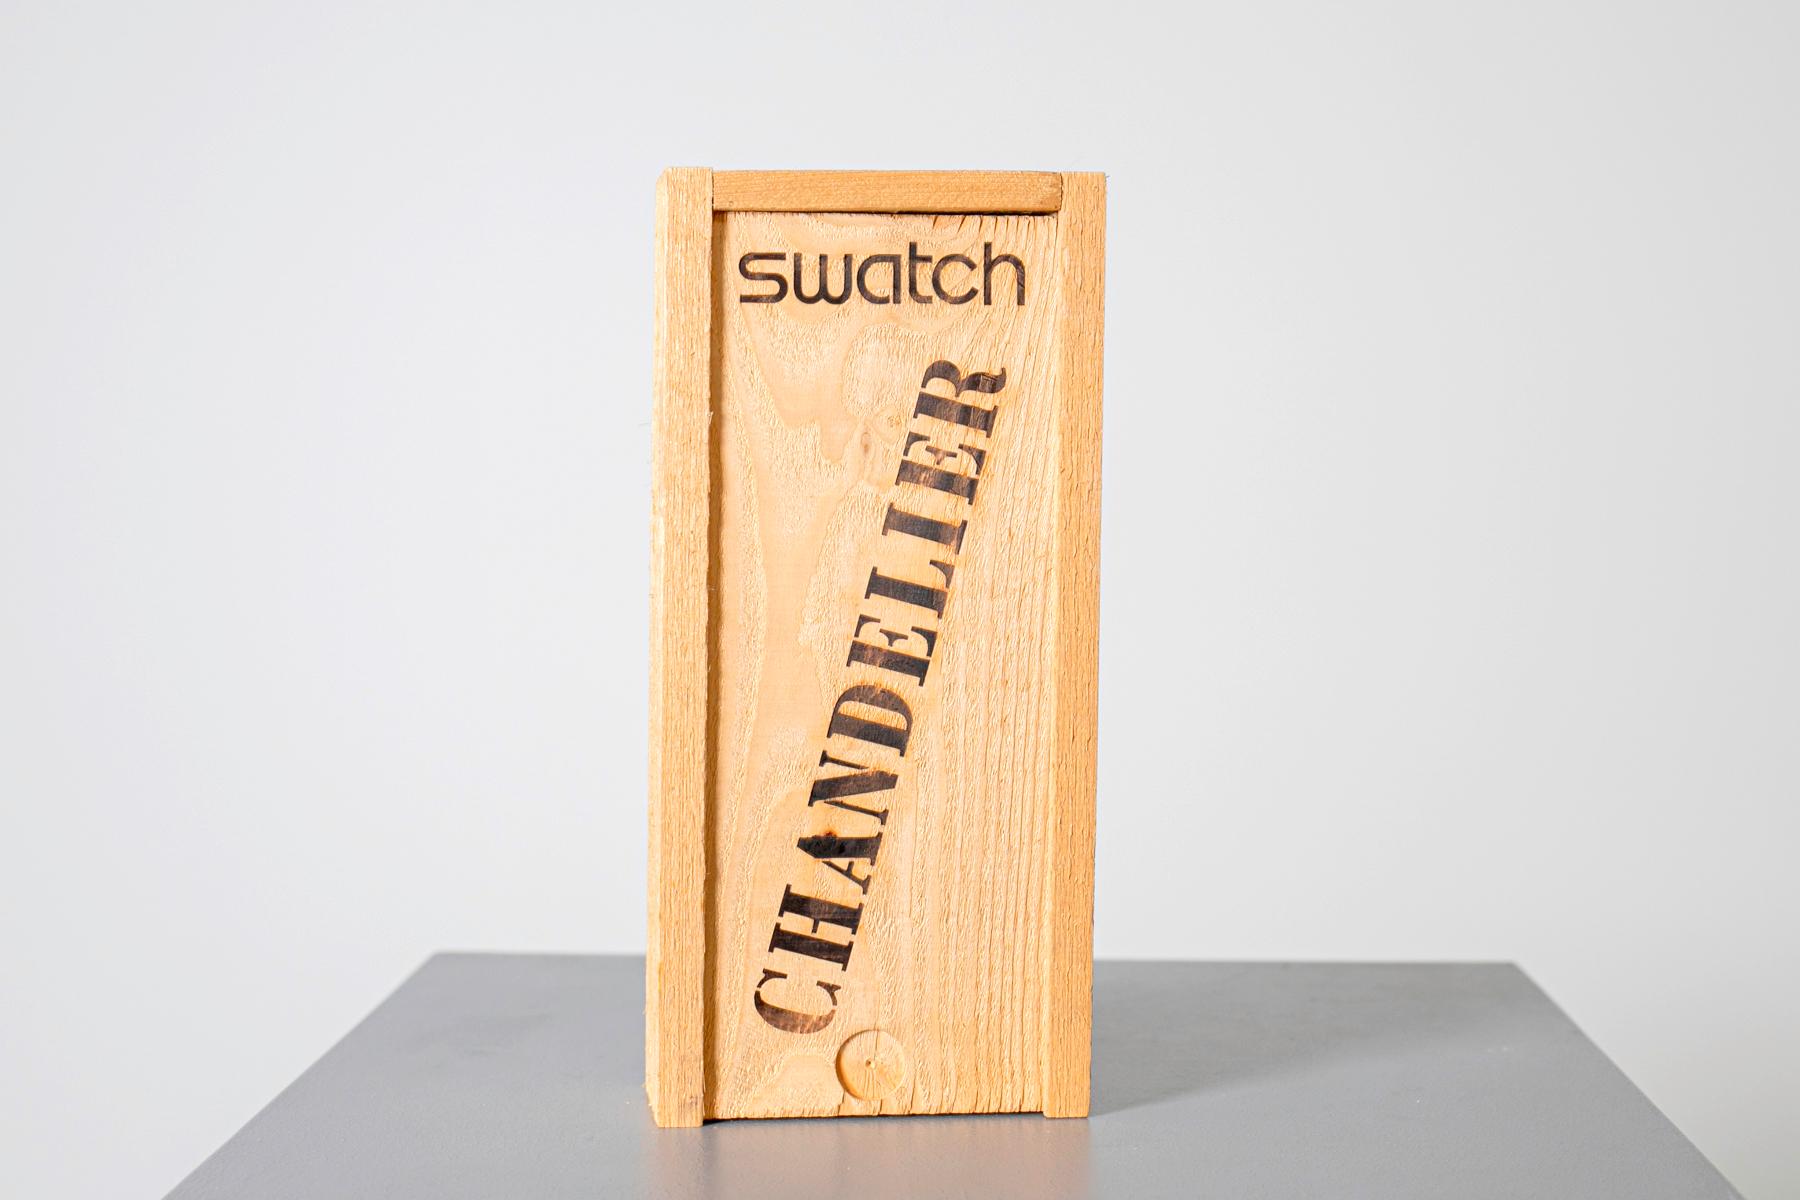 Swatch Chandelier, Christmas edition 1992.
The watch is contained in its original box, in excellent condition, never worn and has the certificate of guarantee of the period.
The watch is housed in a wooden box with straw, an old newspaper and a